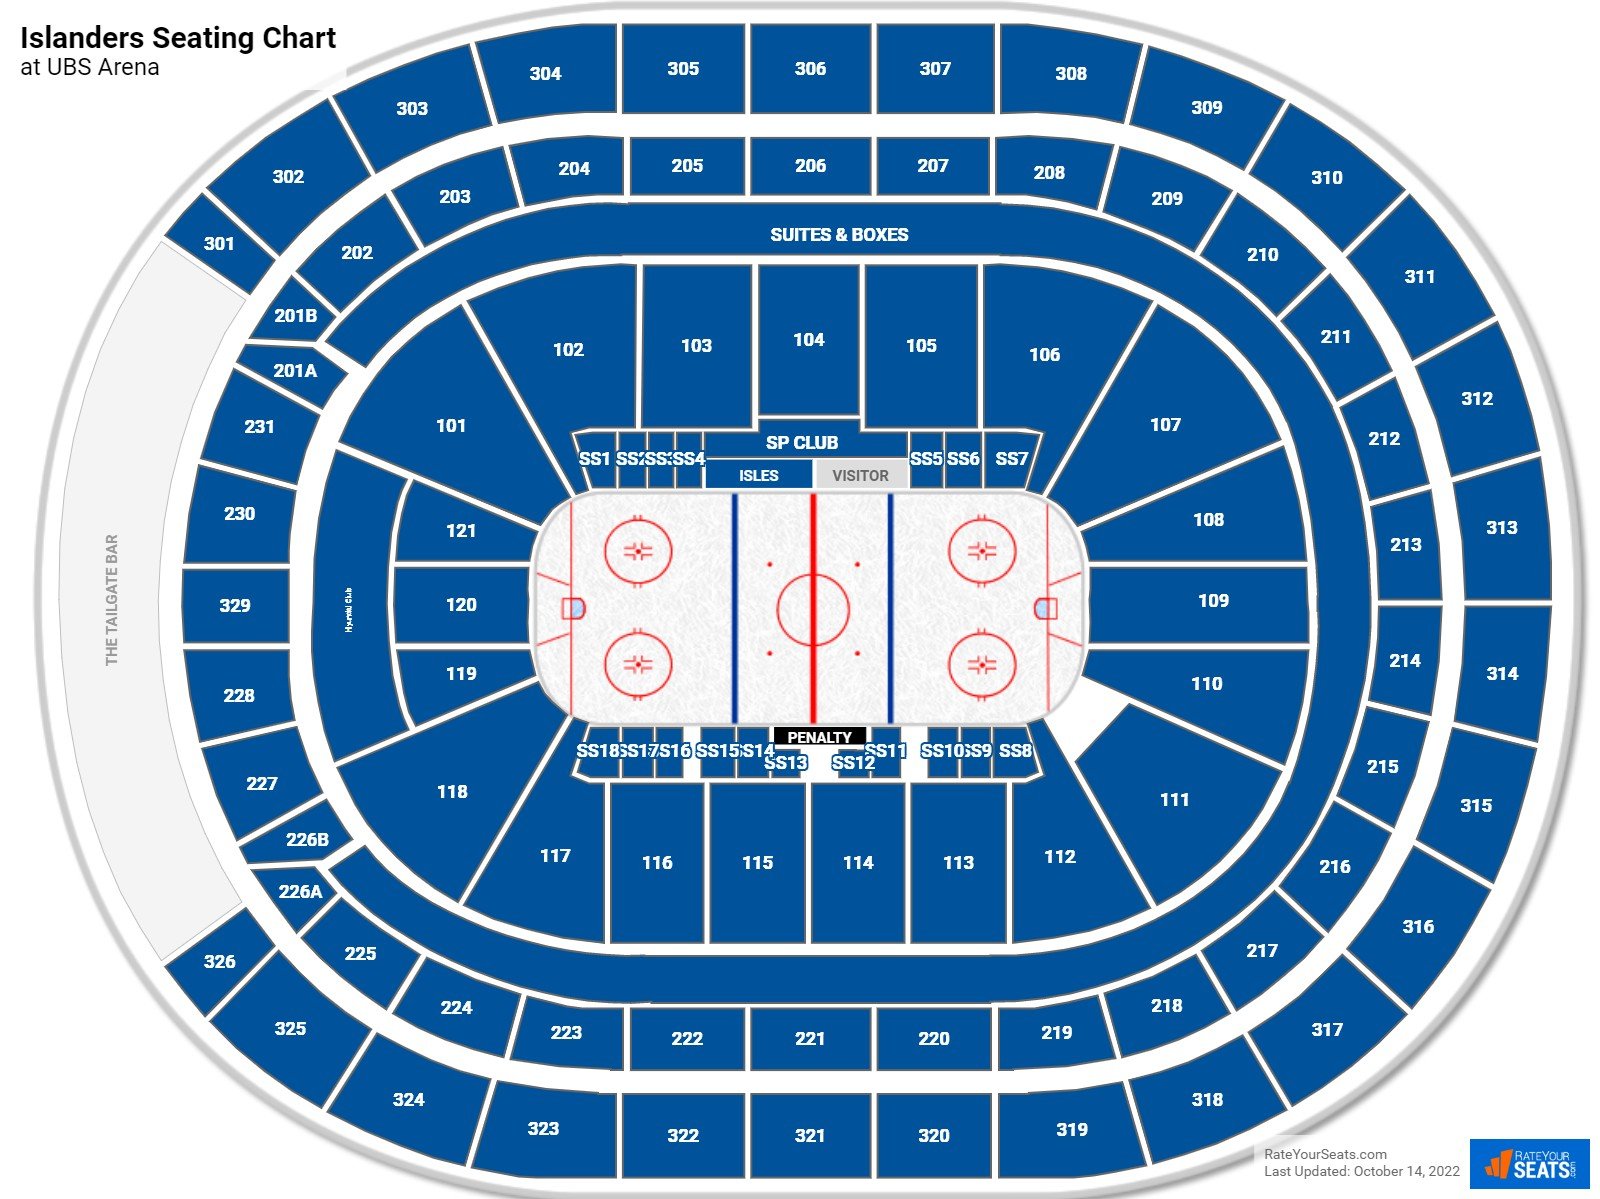 UBS Arena Seating Charts